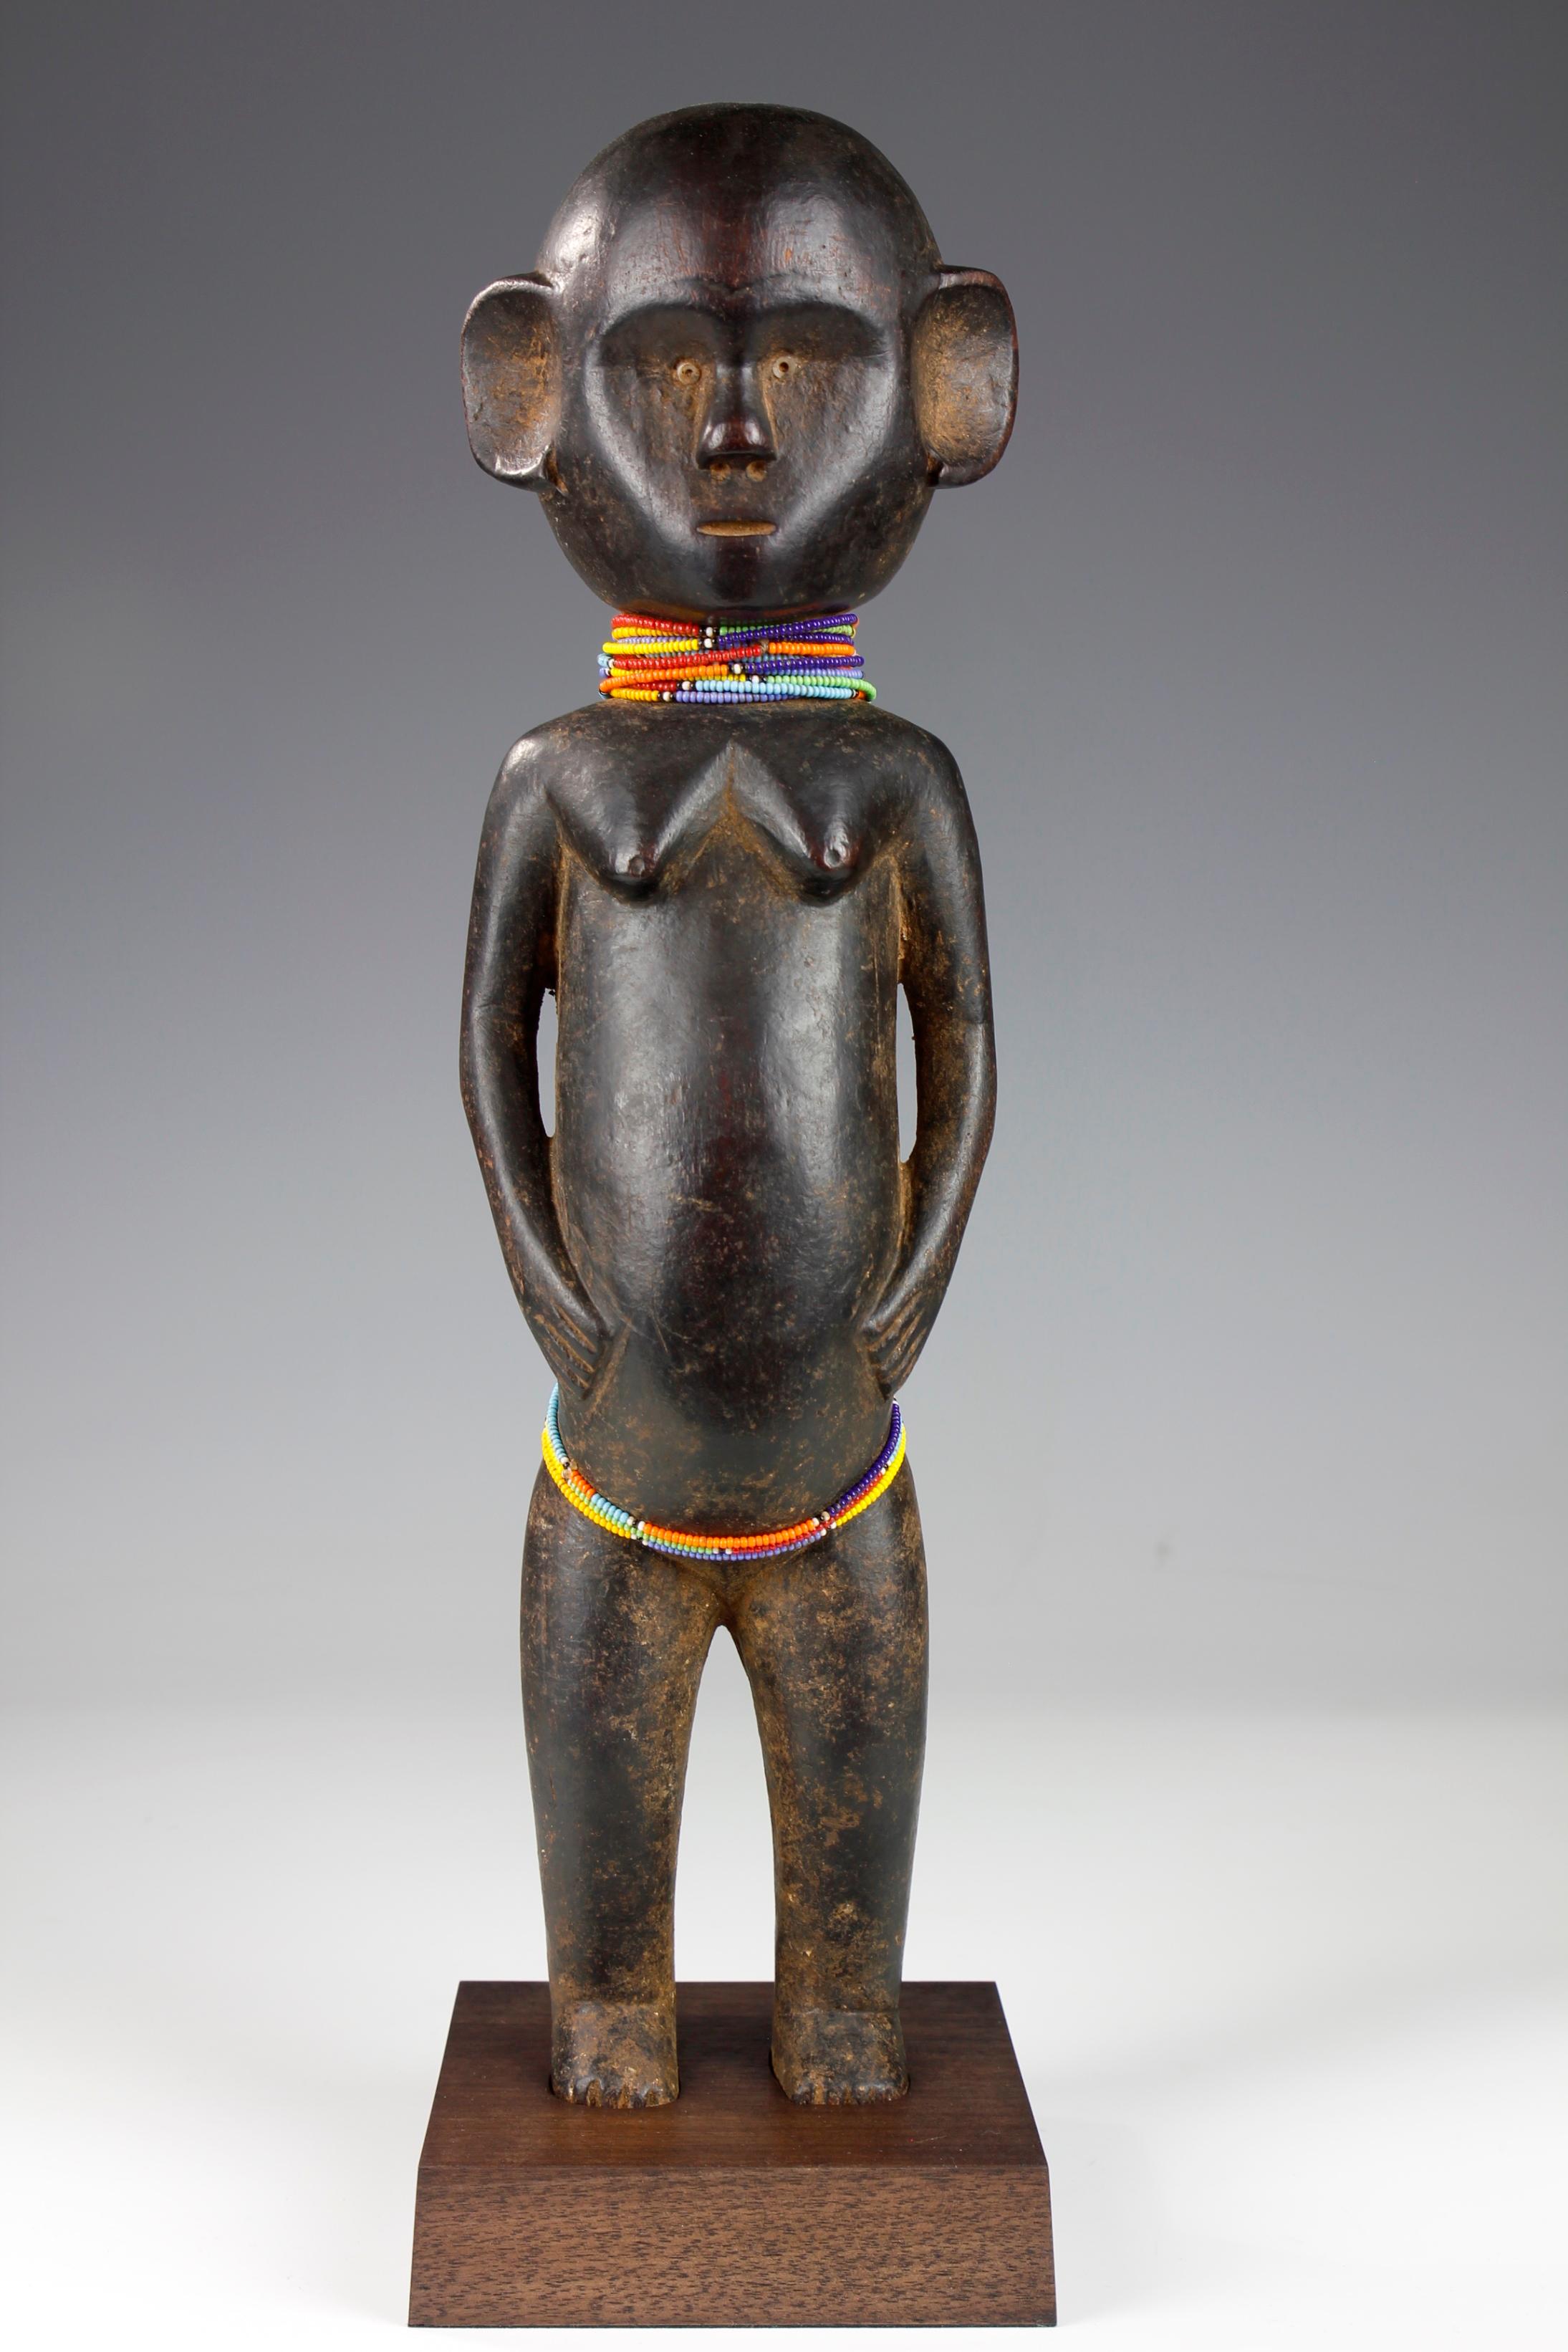 This finely carved mid-twentieth century figurative sculpture, from the Pare culture in Tanzania, depicts a female with large, prominent ears. Standing in a proud, upright stance, she gently rests her hands on her stomach. 

As a type of maternity